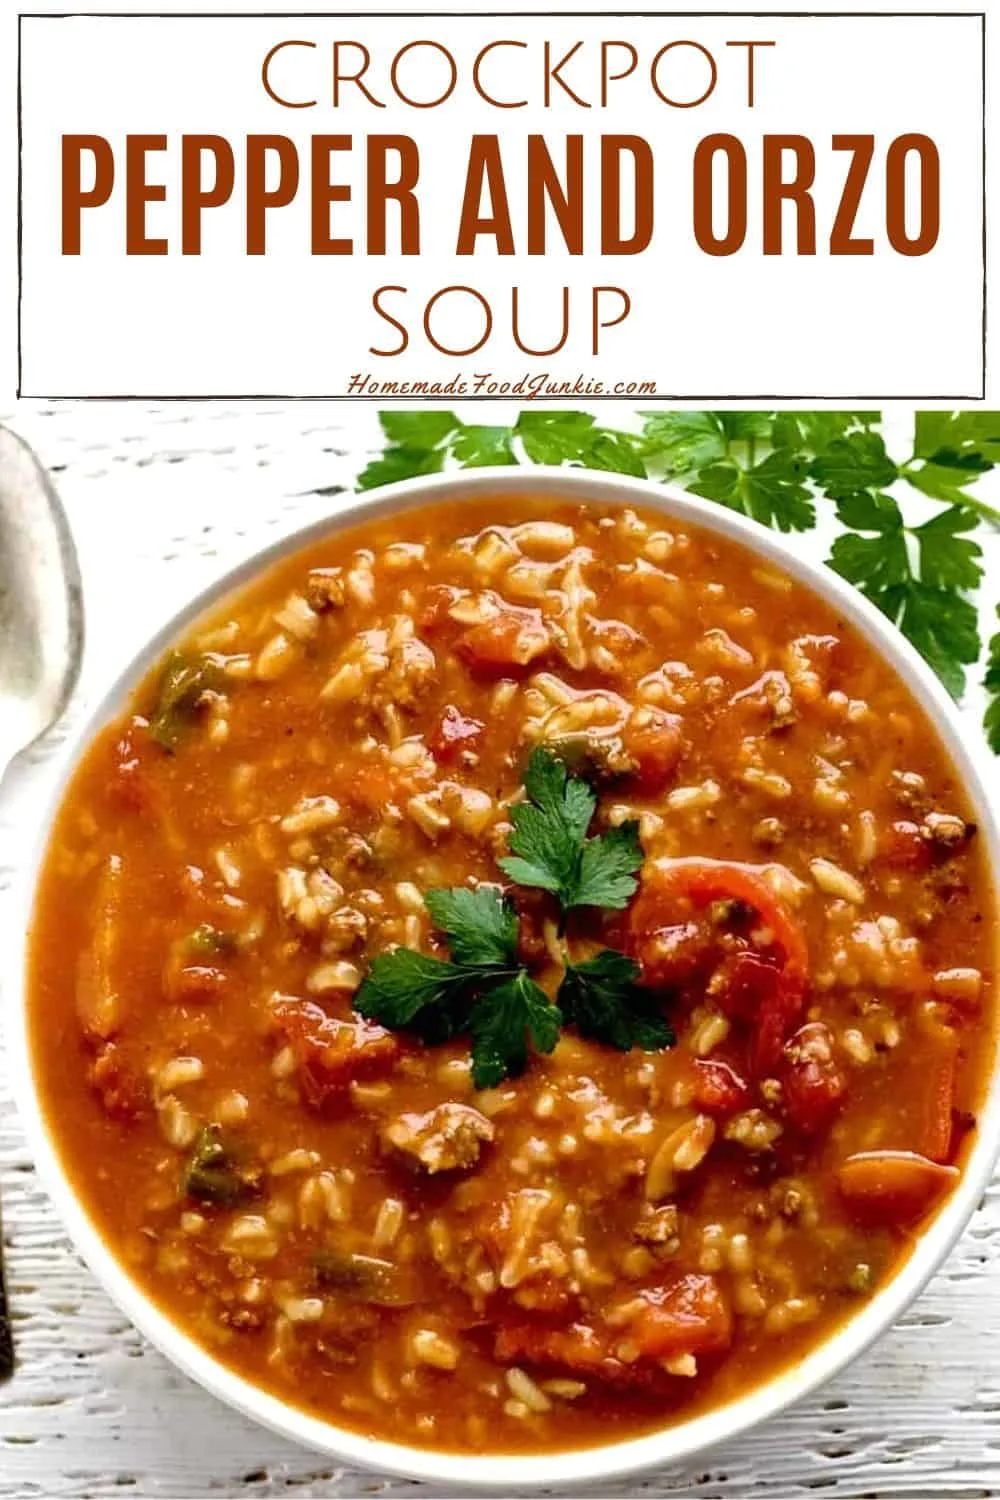 Crockpot Pepper And Orzo Soup-Pin Image